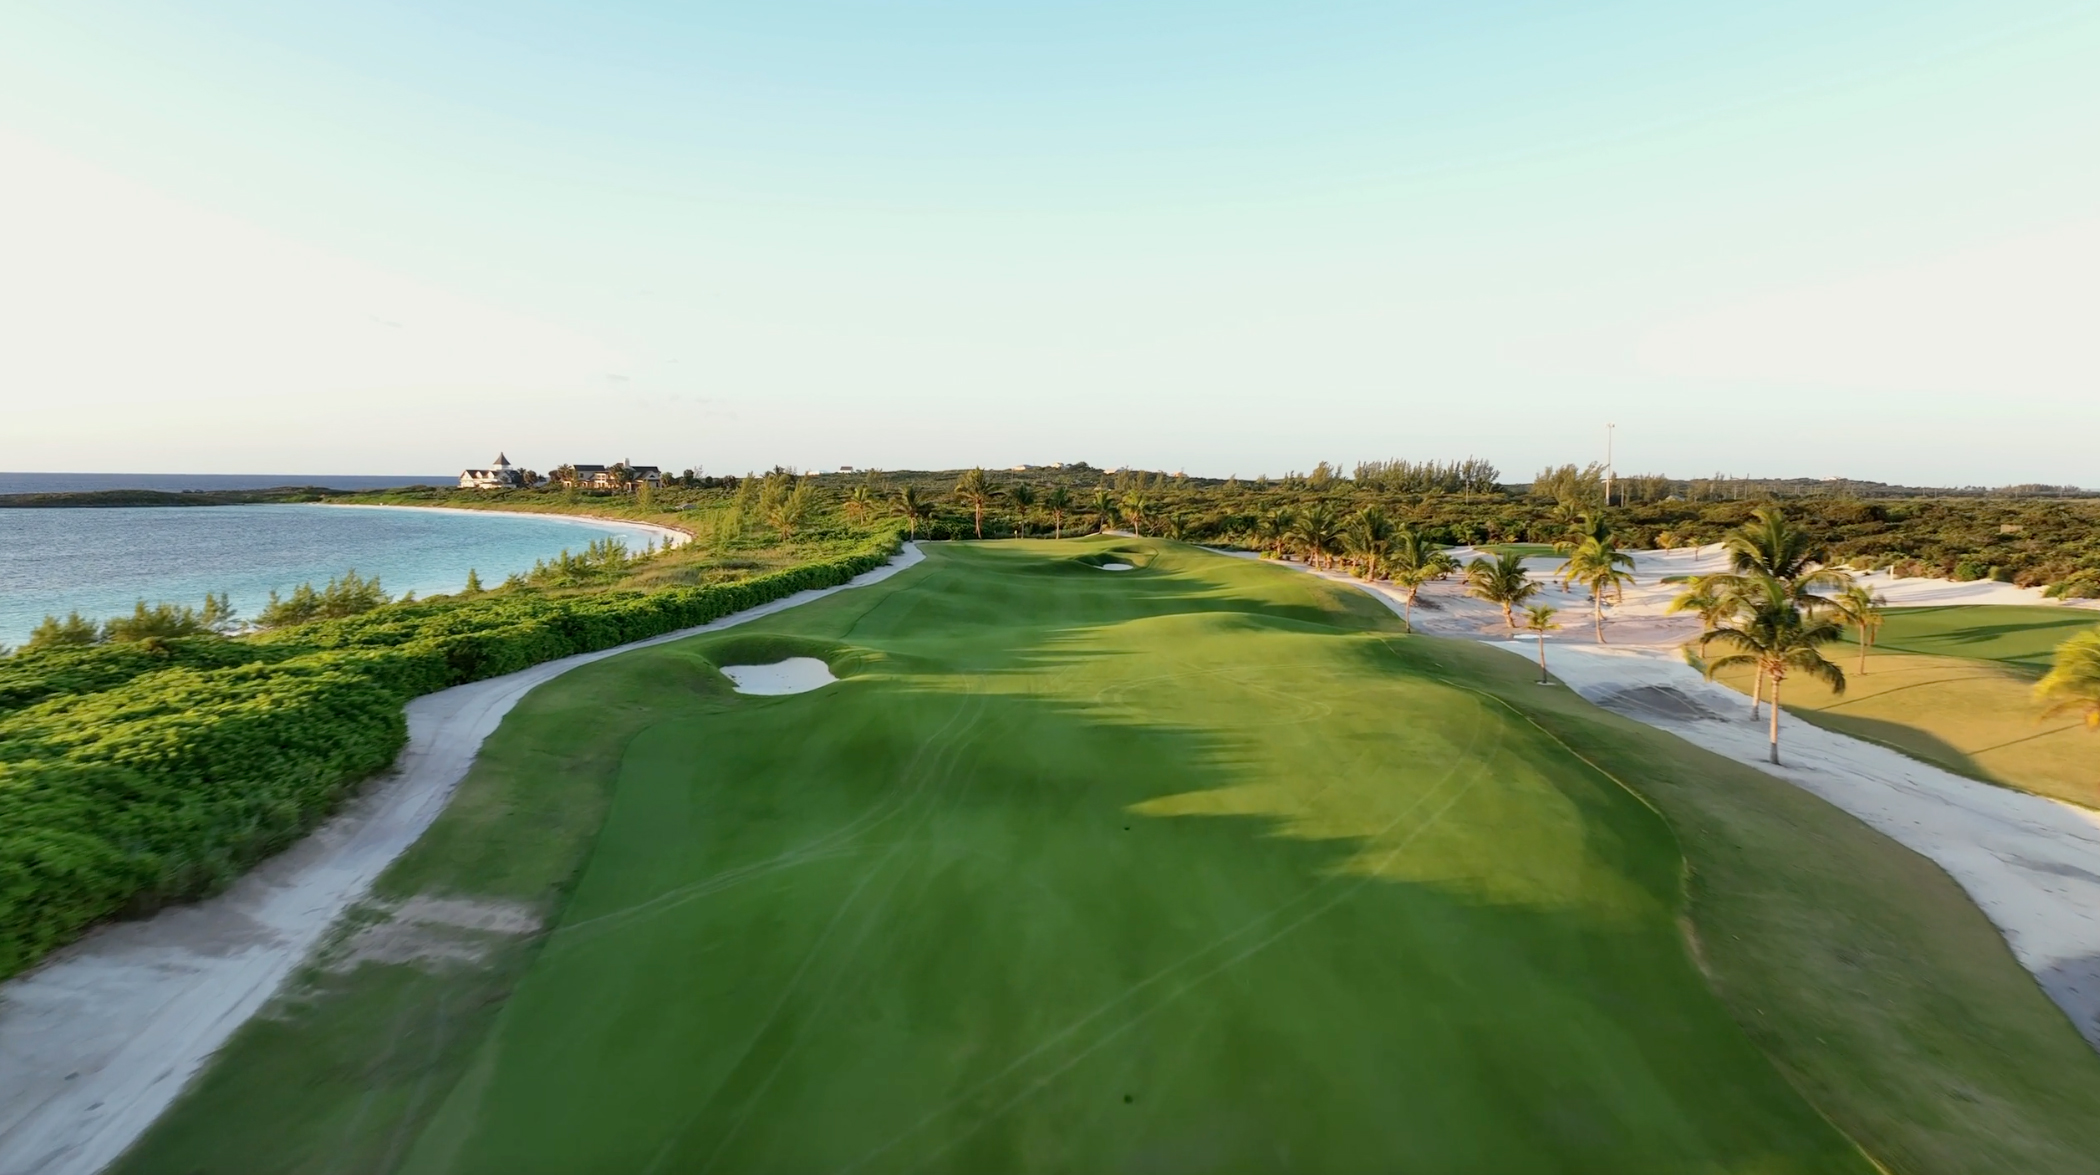 Aerial shot of Hole 7 from The Abaco Club golf course